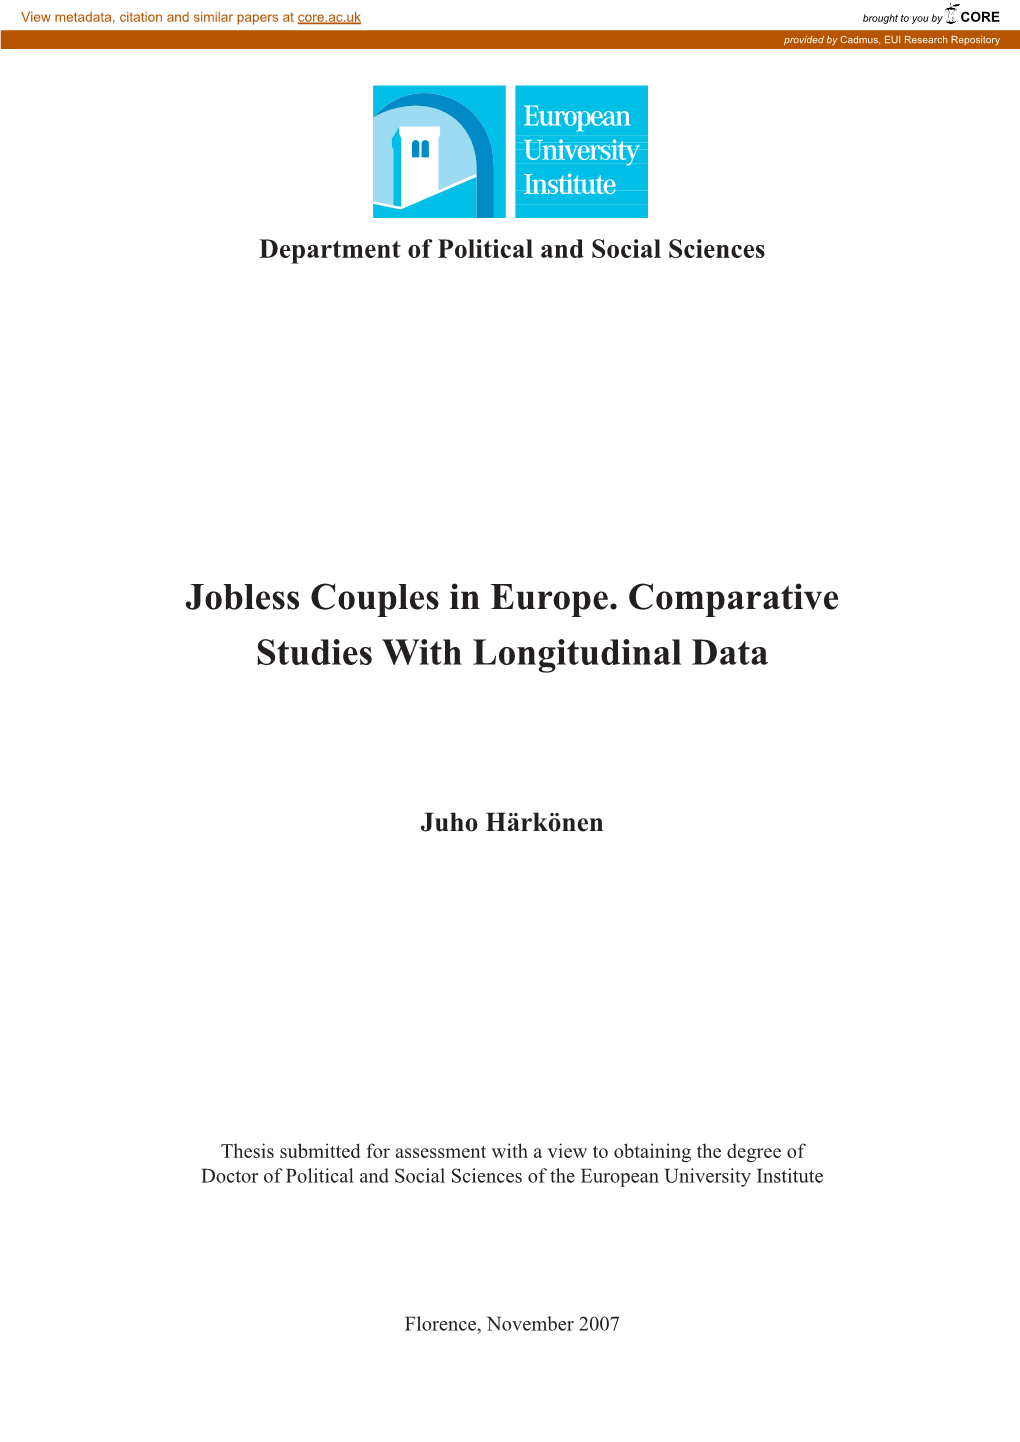 Jobless Couples in Europe. Comparative Studies with Longitudinal Data